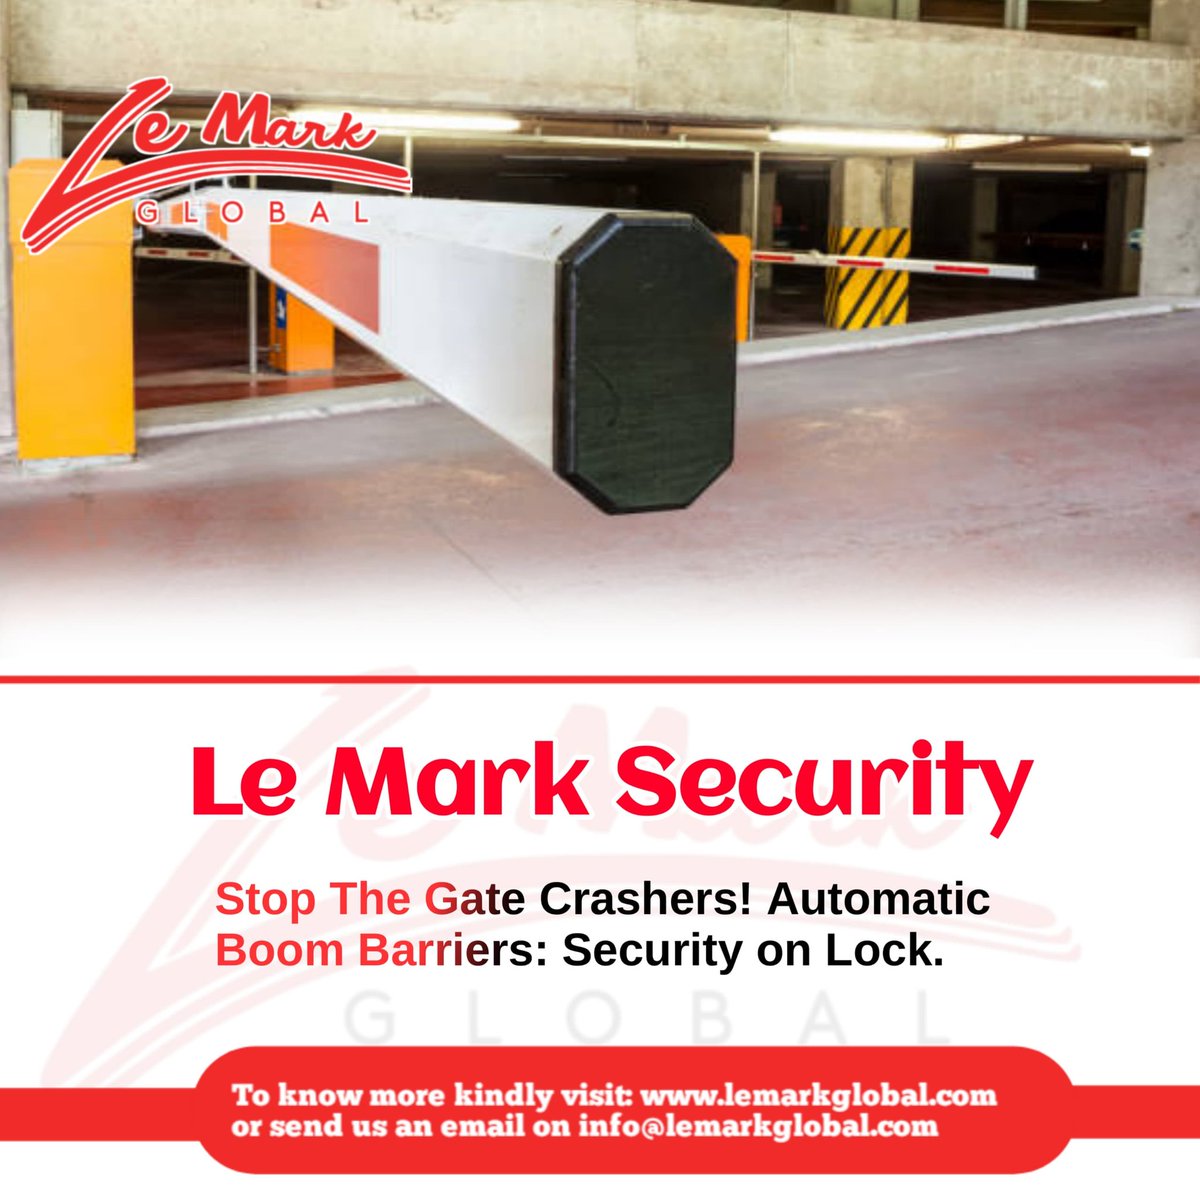 Click now and be amazed!
lemarkglobal.com

#automaticboombarrier #parkinglotbarrier #securitygate #accesscontrolsystem #securitybarrier #parkingsecurity #boomgatesystem #carparkbarrier #securitysolution #entrysystem #automaticboombarrierforgatedcommunities